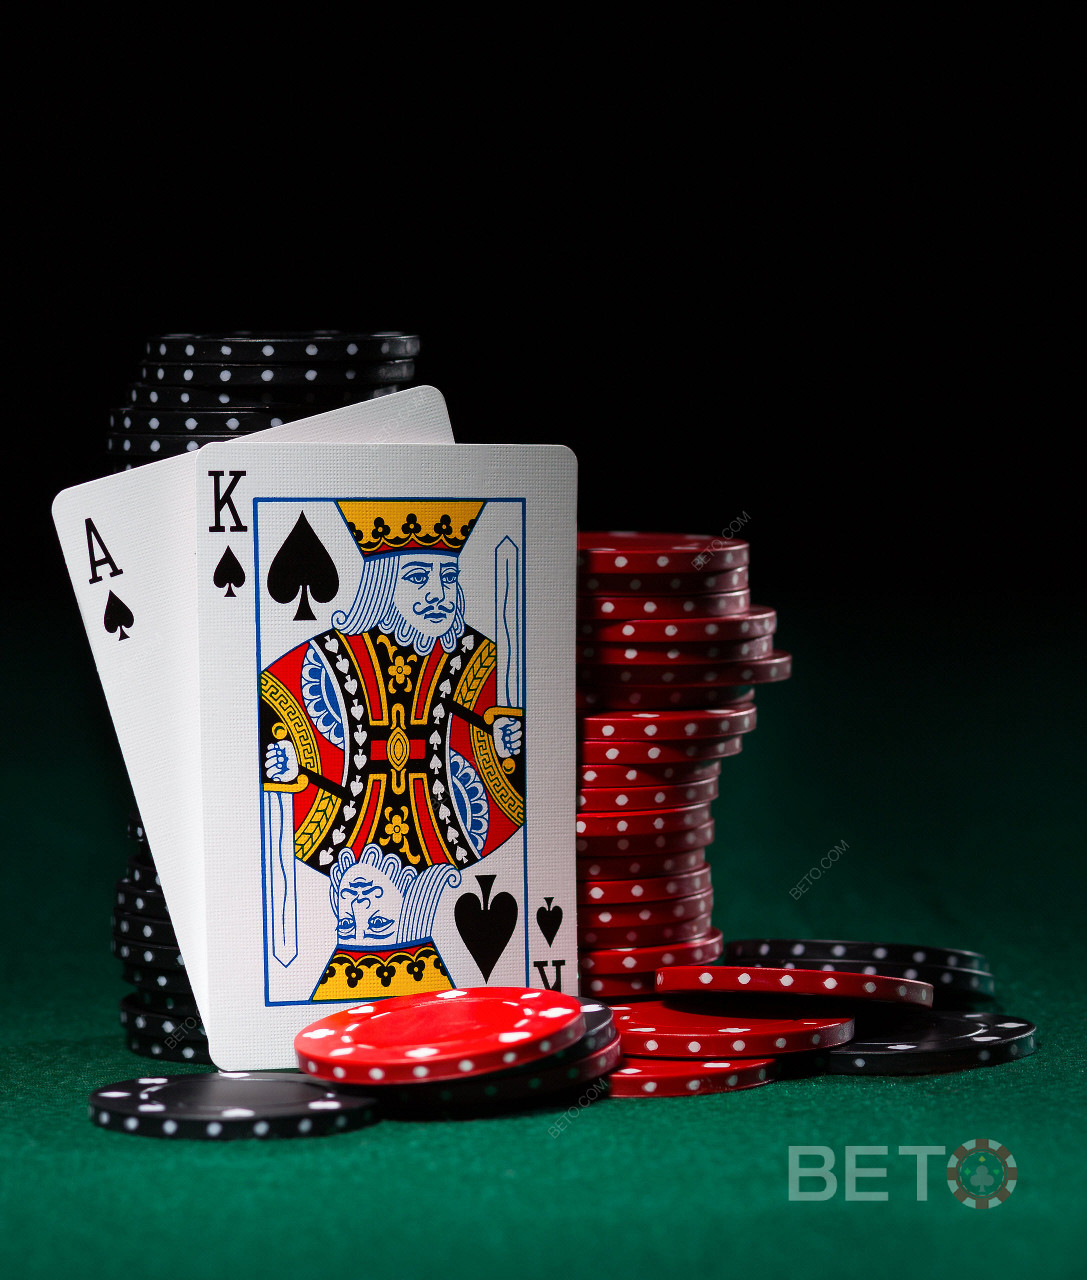 Video poker games and card games is also avaible at BitStarz.